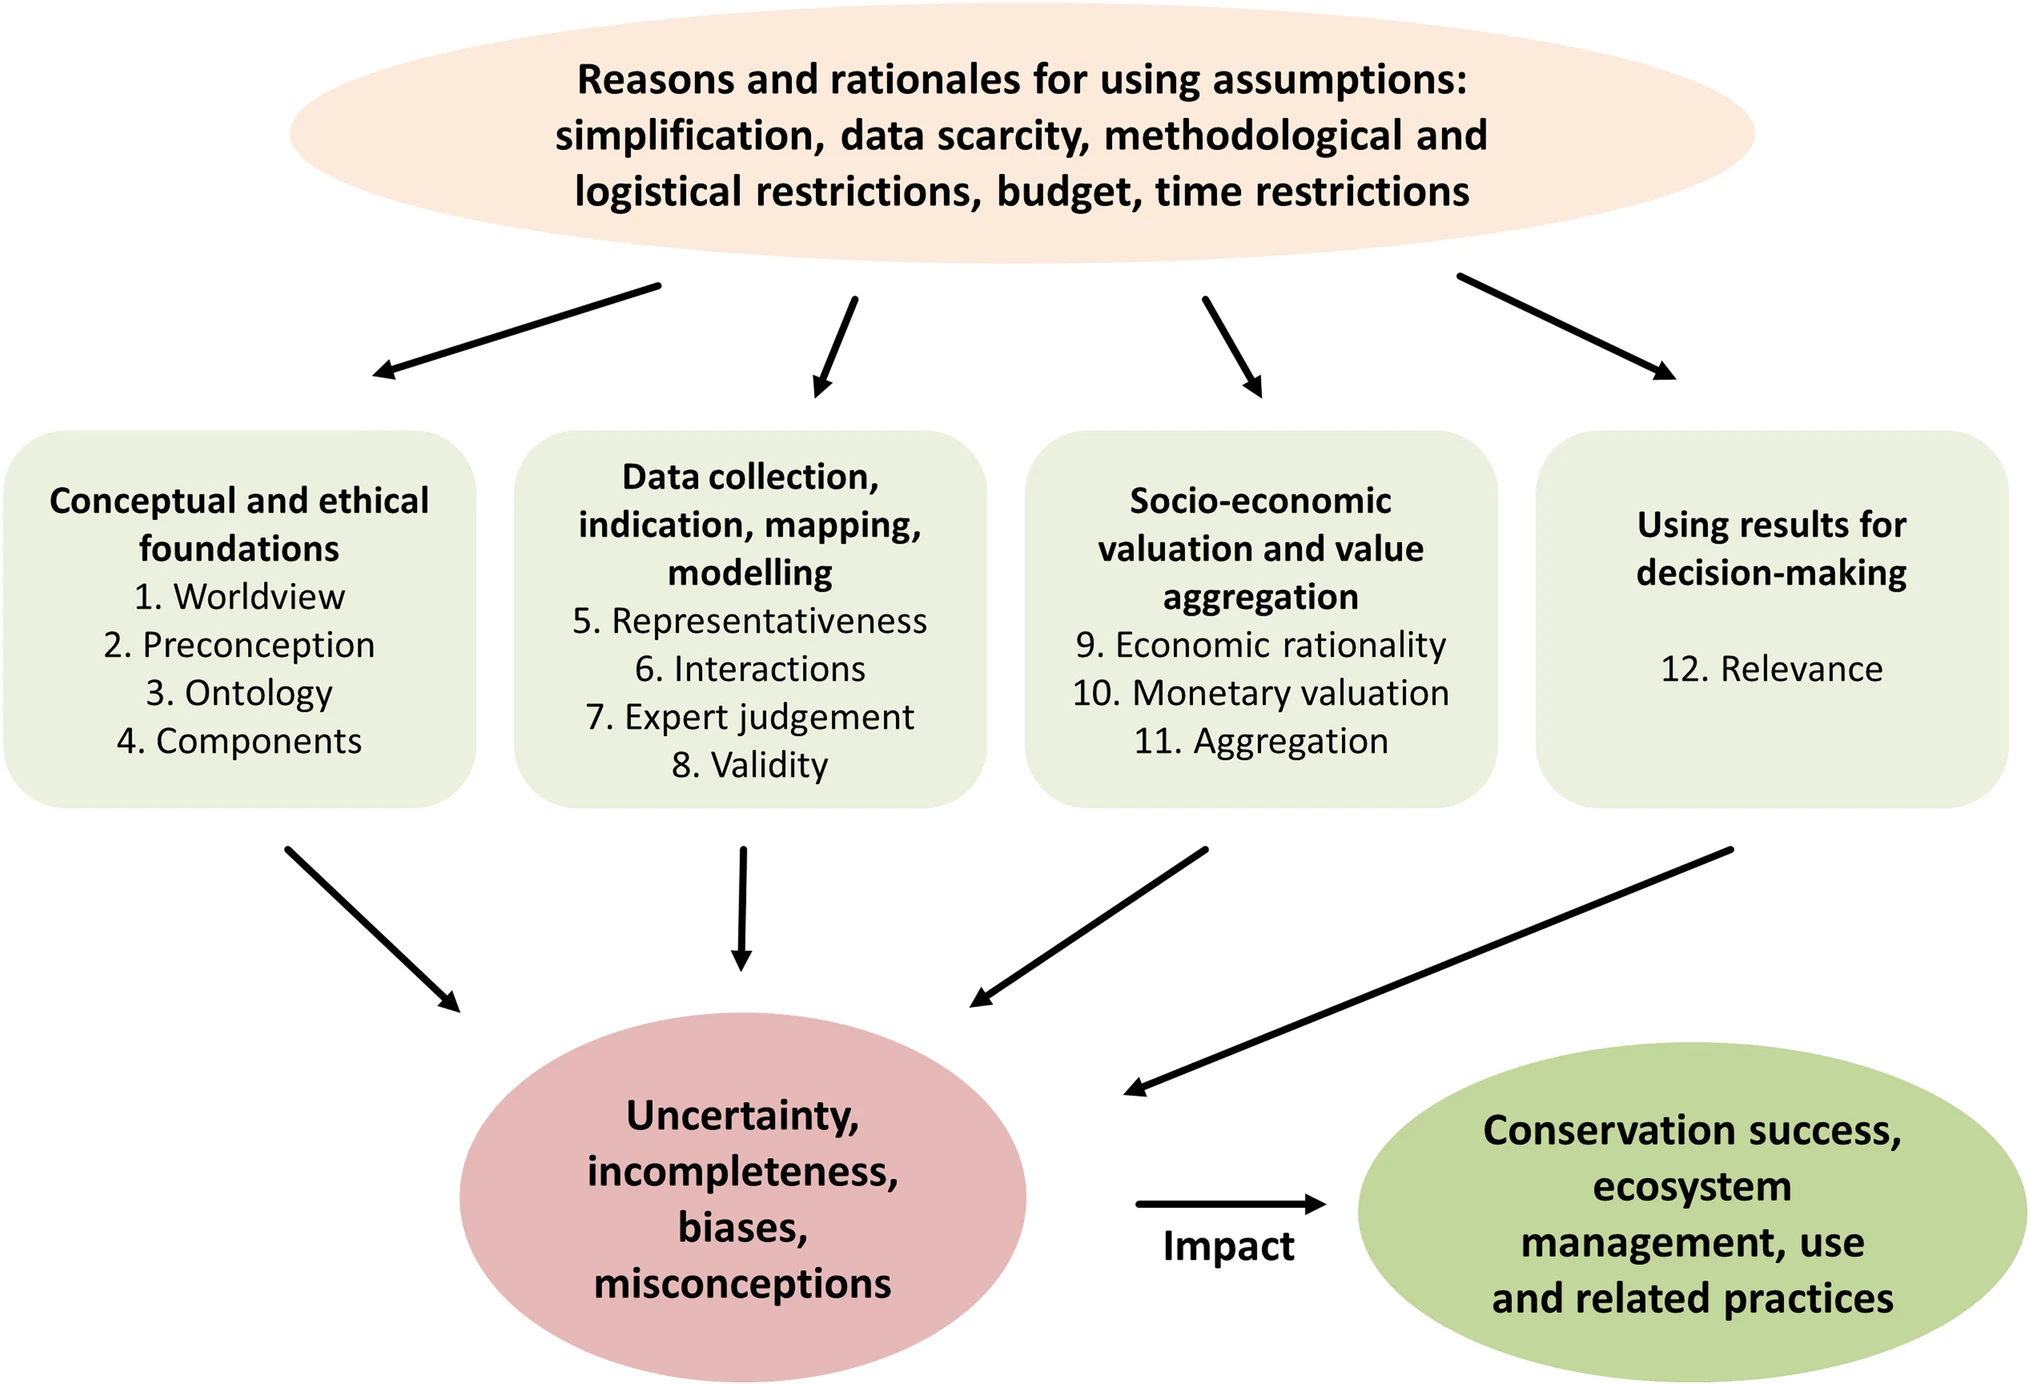 Twelve types of assumptions in four domains contribute to uncertainties, incompleteness, biases or misconceptions of ecosystem service assessments. These, in turn, can have impacts on the success of conservation decisions and ecosystem management and use informed by these assessments